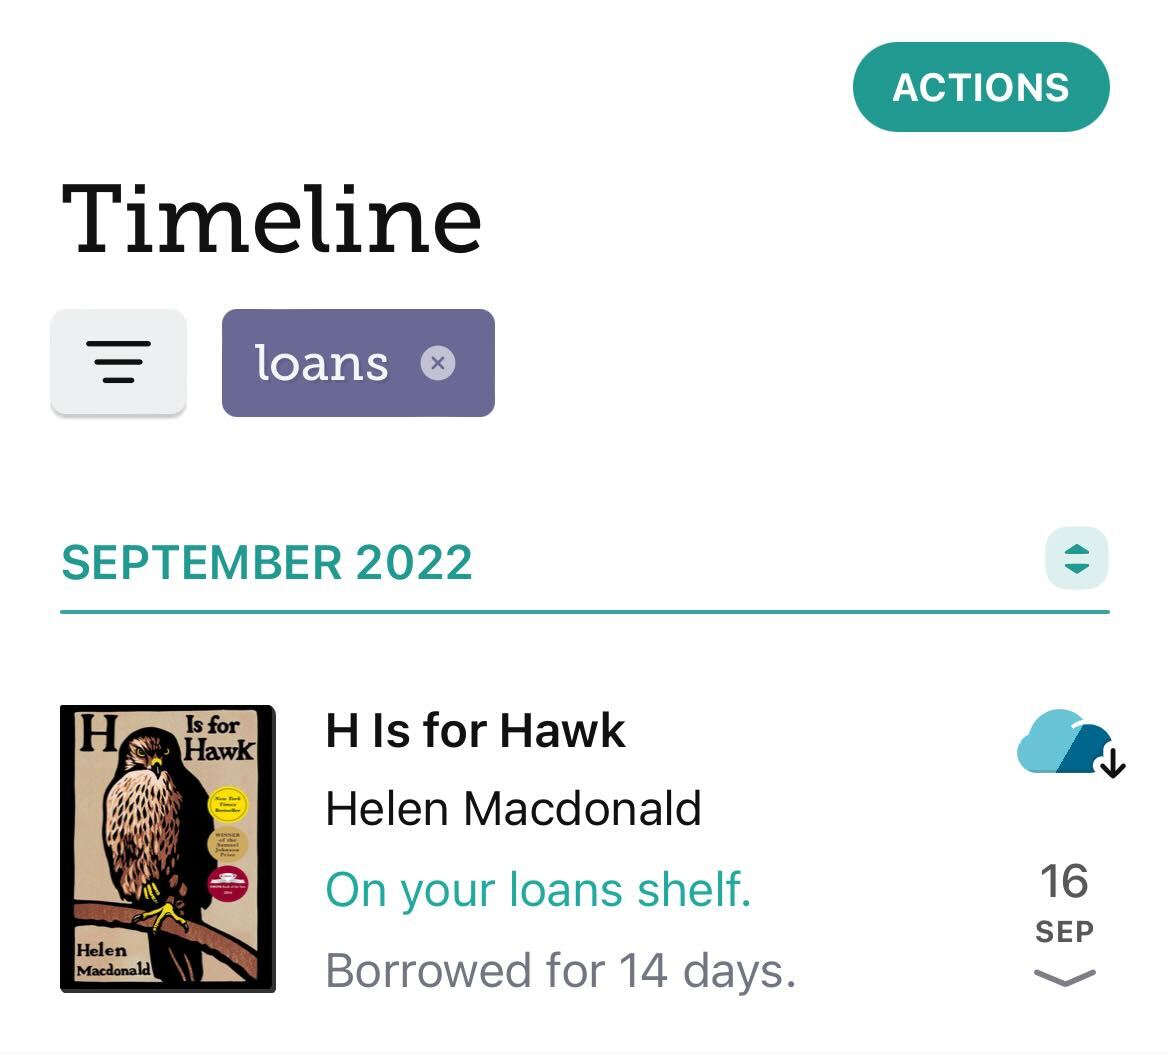 timeline with "loans" filter applied